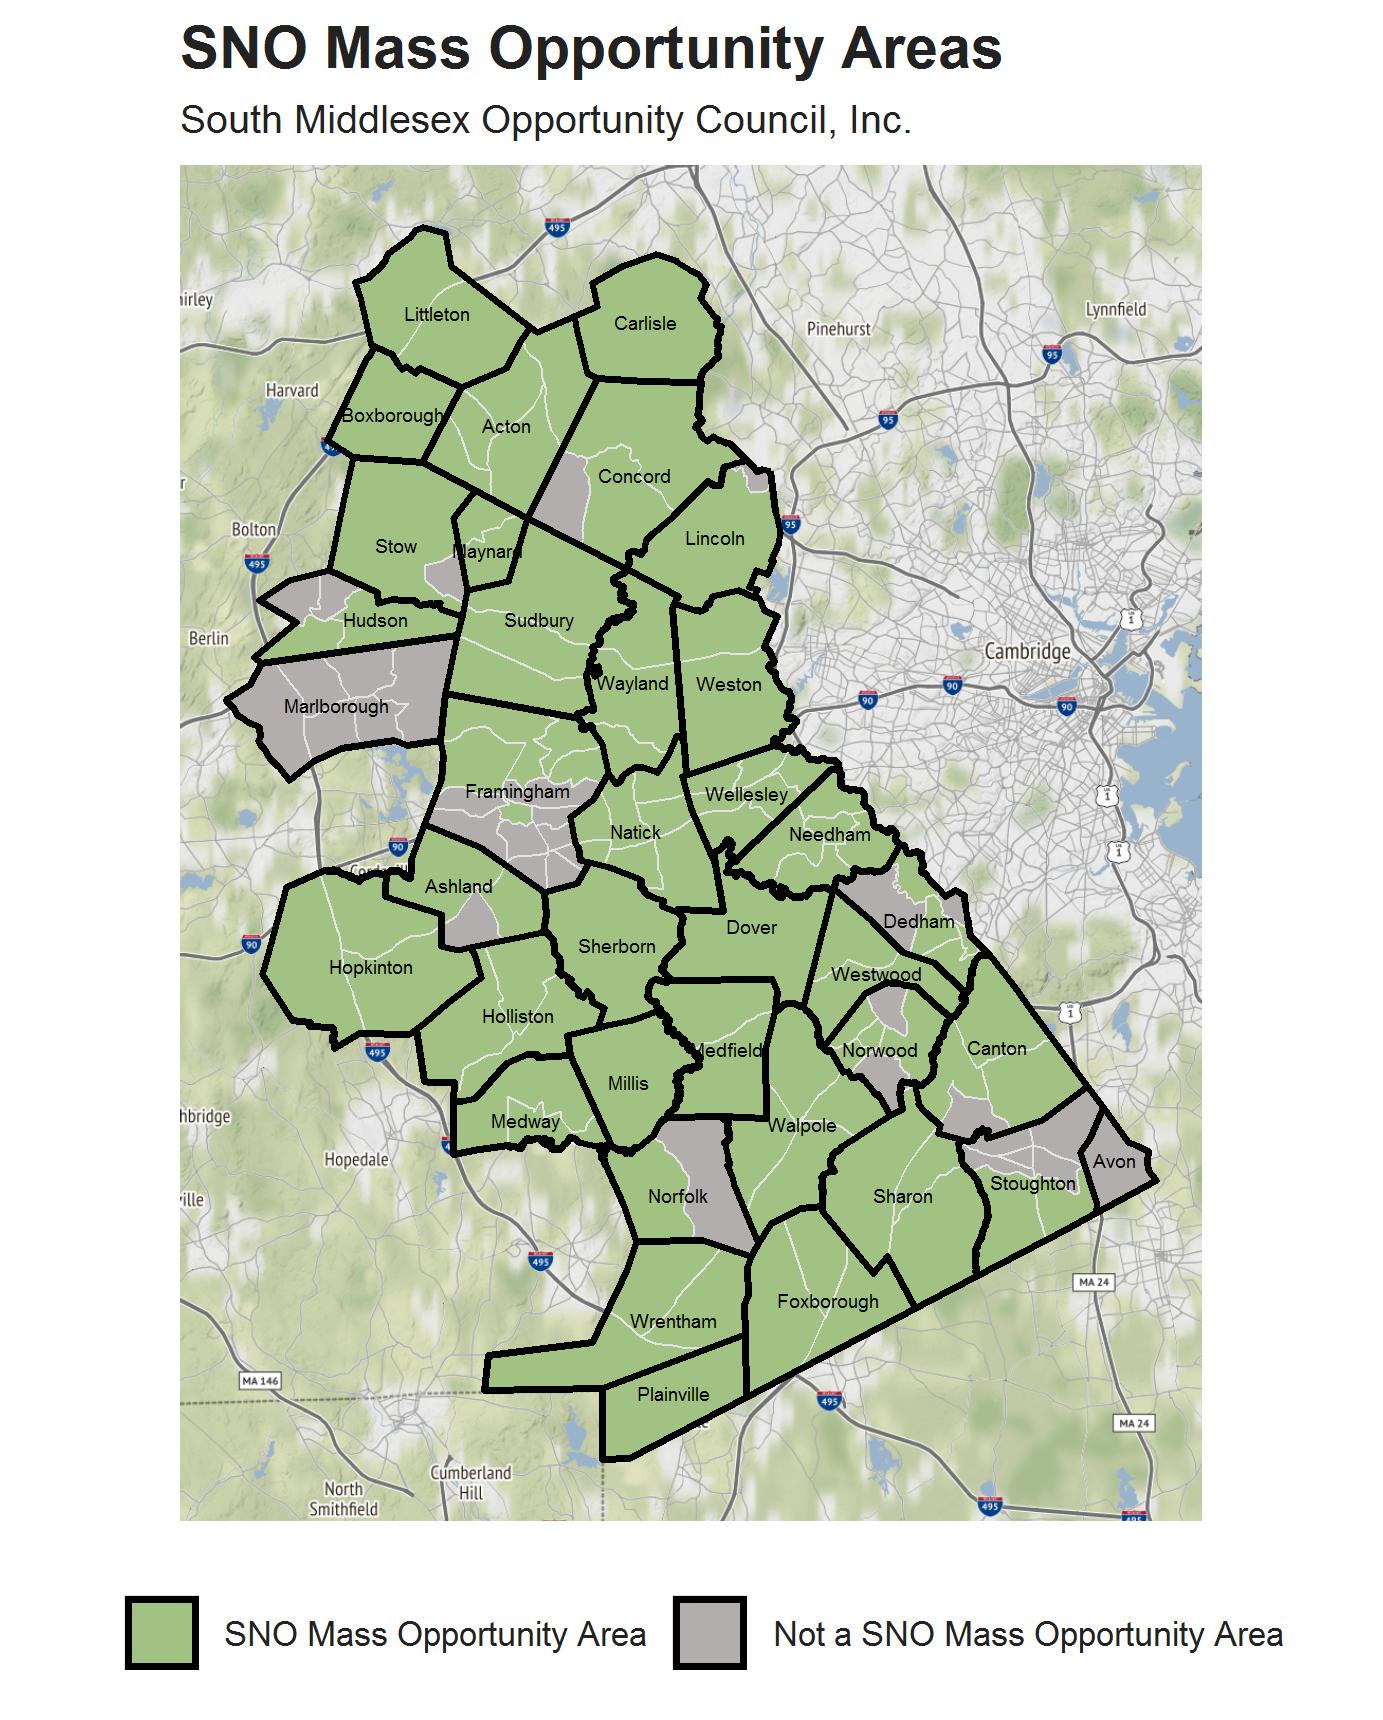 SNO Mass Map of Metro West that highlights opportunity areas within the region